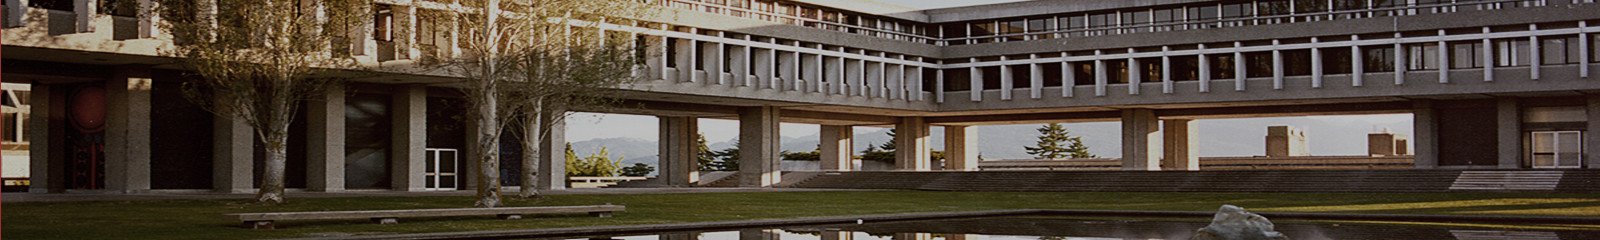 Simon Fraser University (SFU) is one of the only universities offering flexible courses that can be taken online, on weekends, or at night. 
